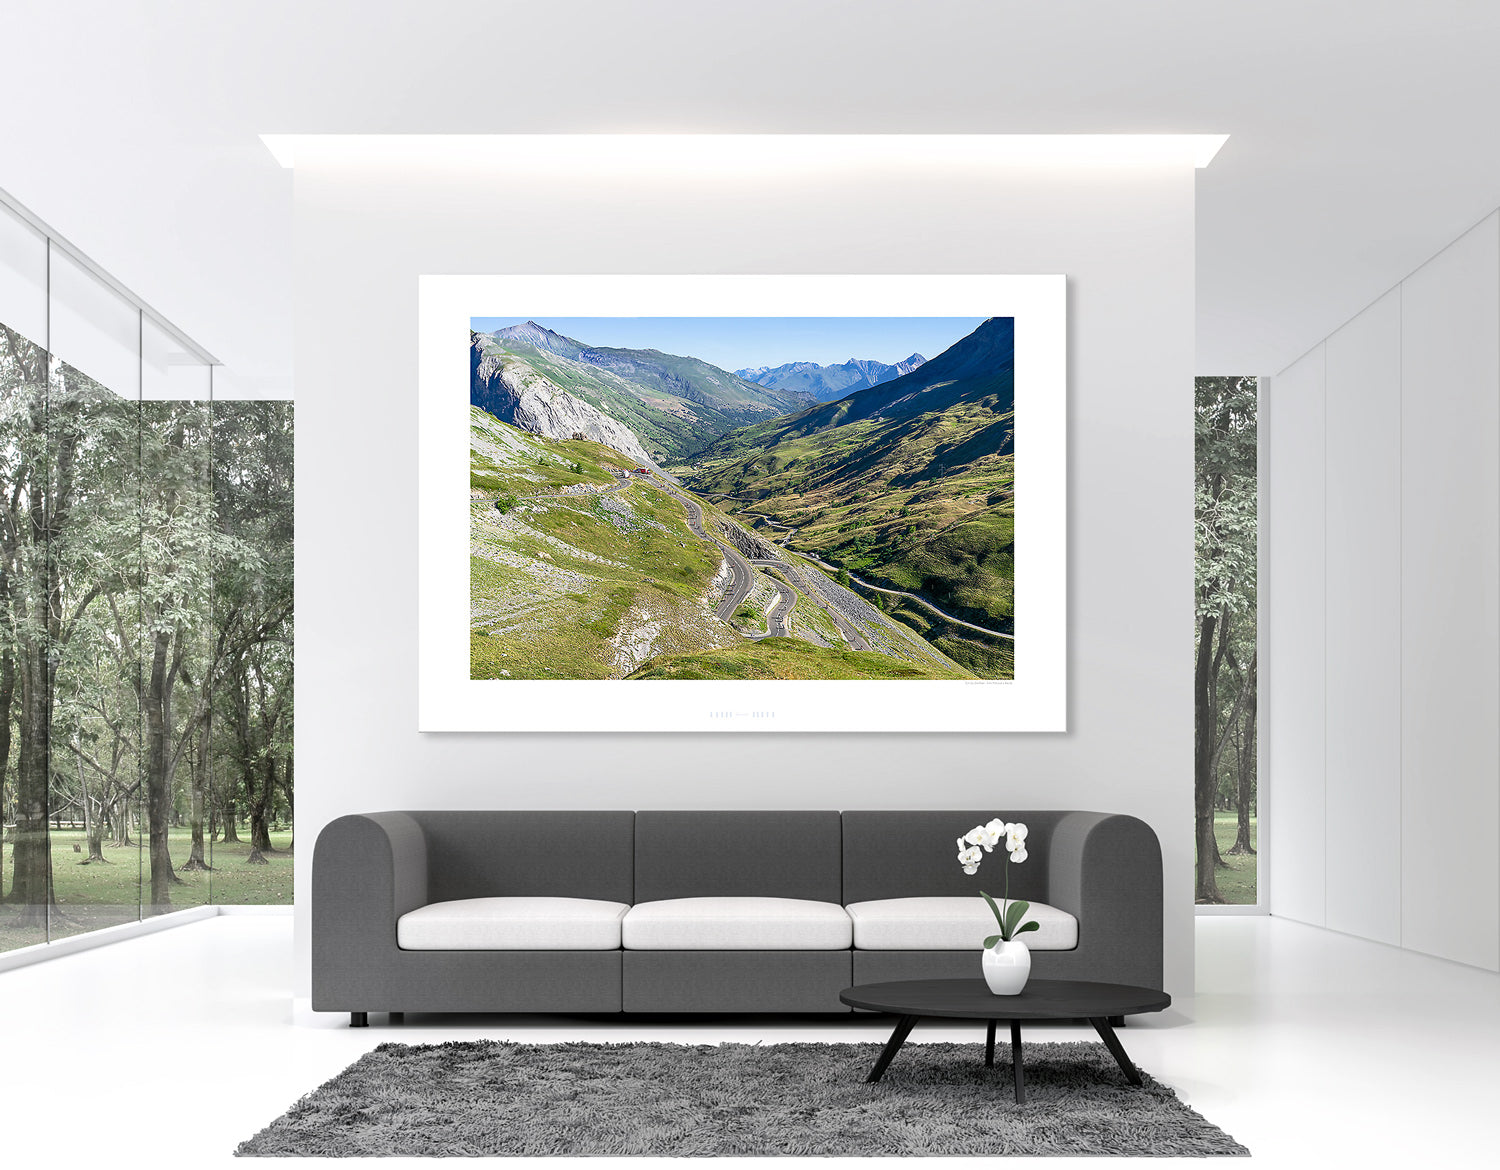 Cycling Art. Unique gifts for cyclists. Col du Galibier. Cycling decor, Cycling interiors, Luxury Gifts for Cyclists, Photography prints by David Tedman. Office art, Art for offices Gifts for Dad, gifts for Fathers Day. Original gifts for cyclists